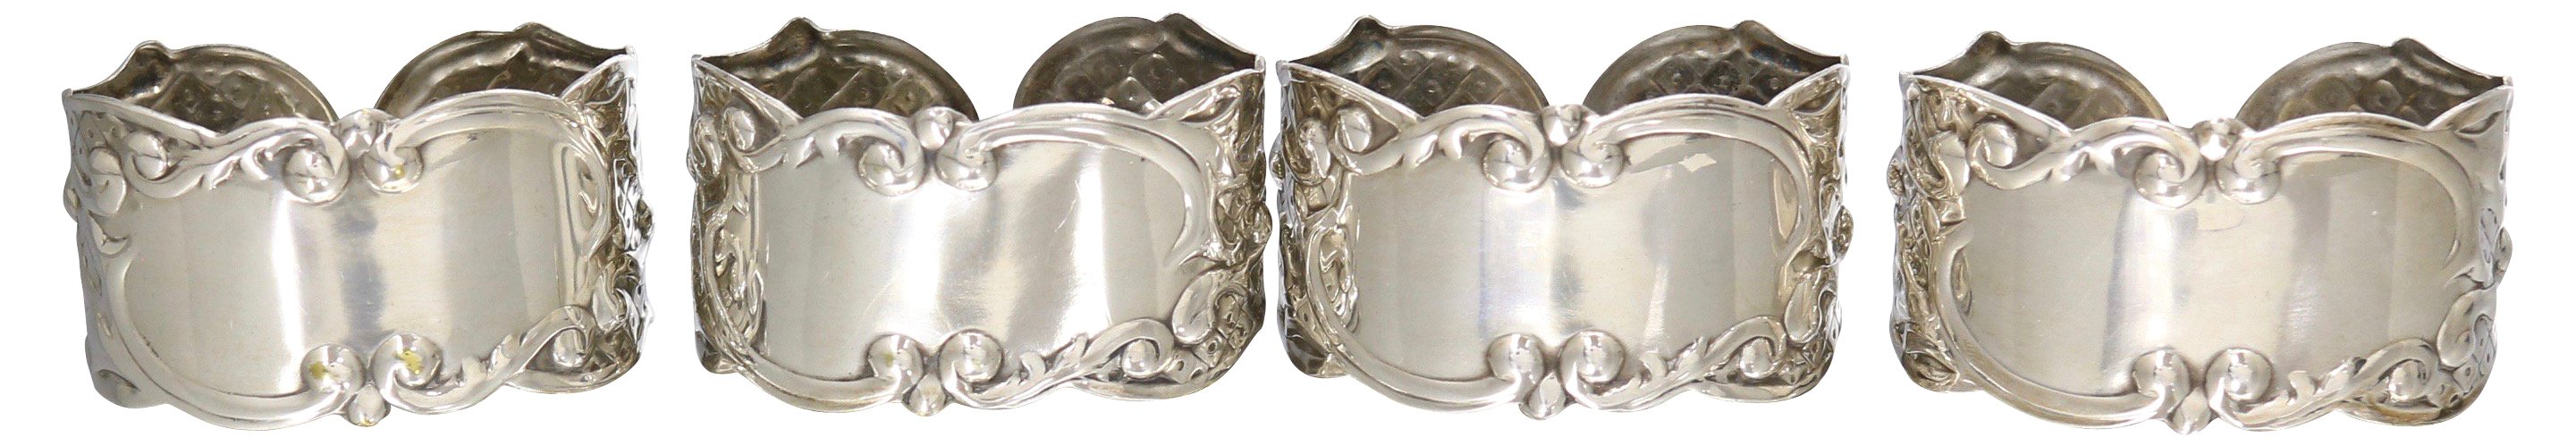 English Silver-Plate Napkin Rings, S/4~P77540806